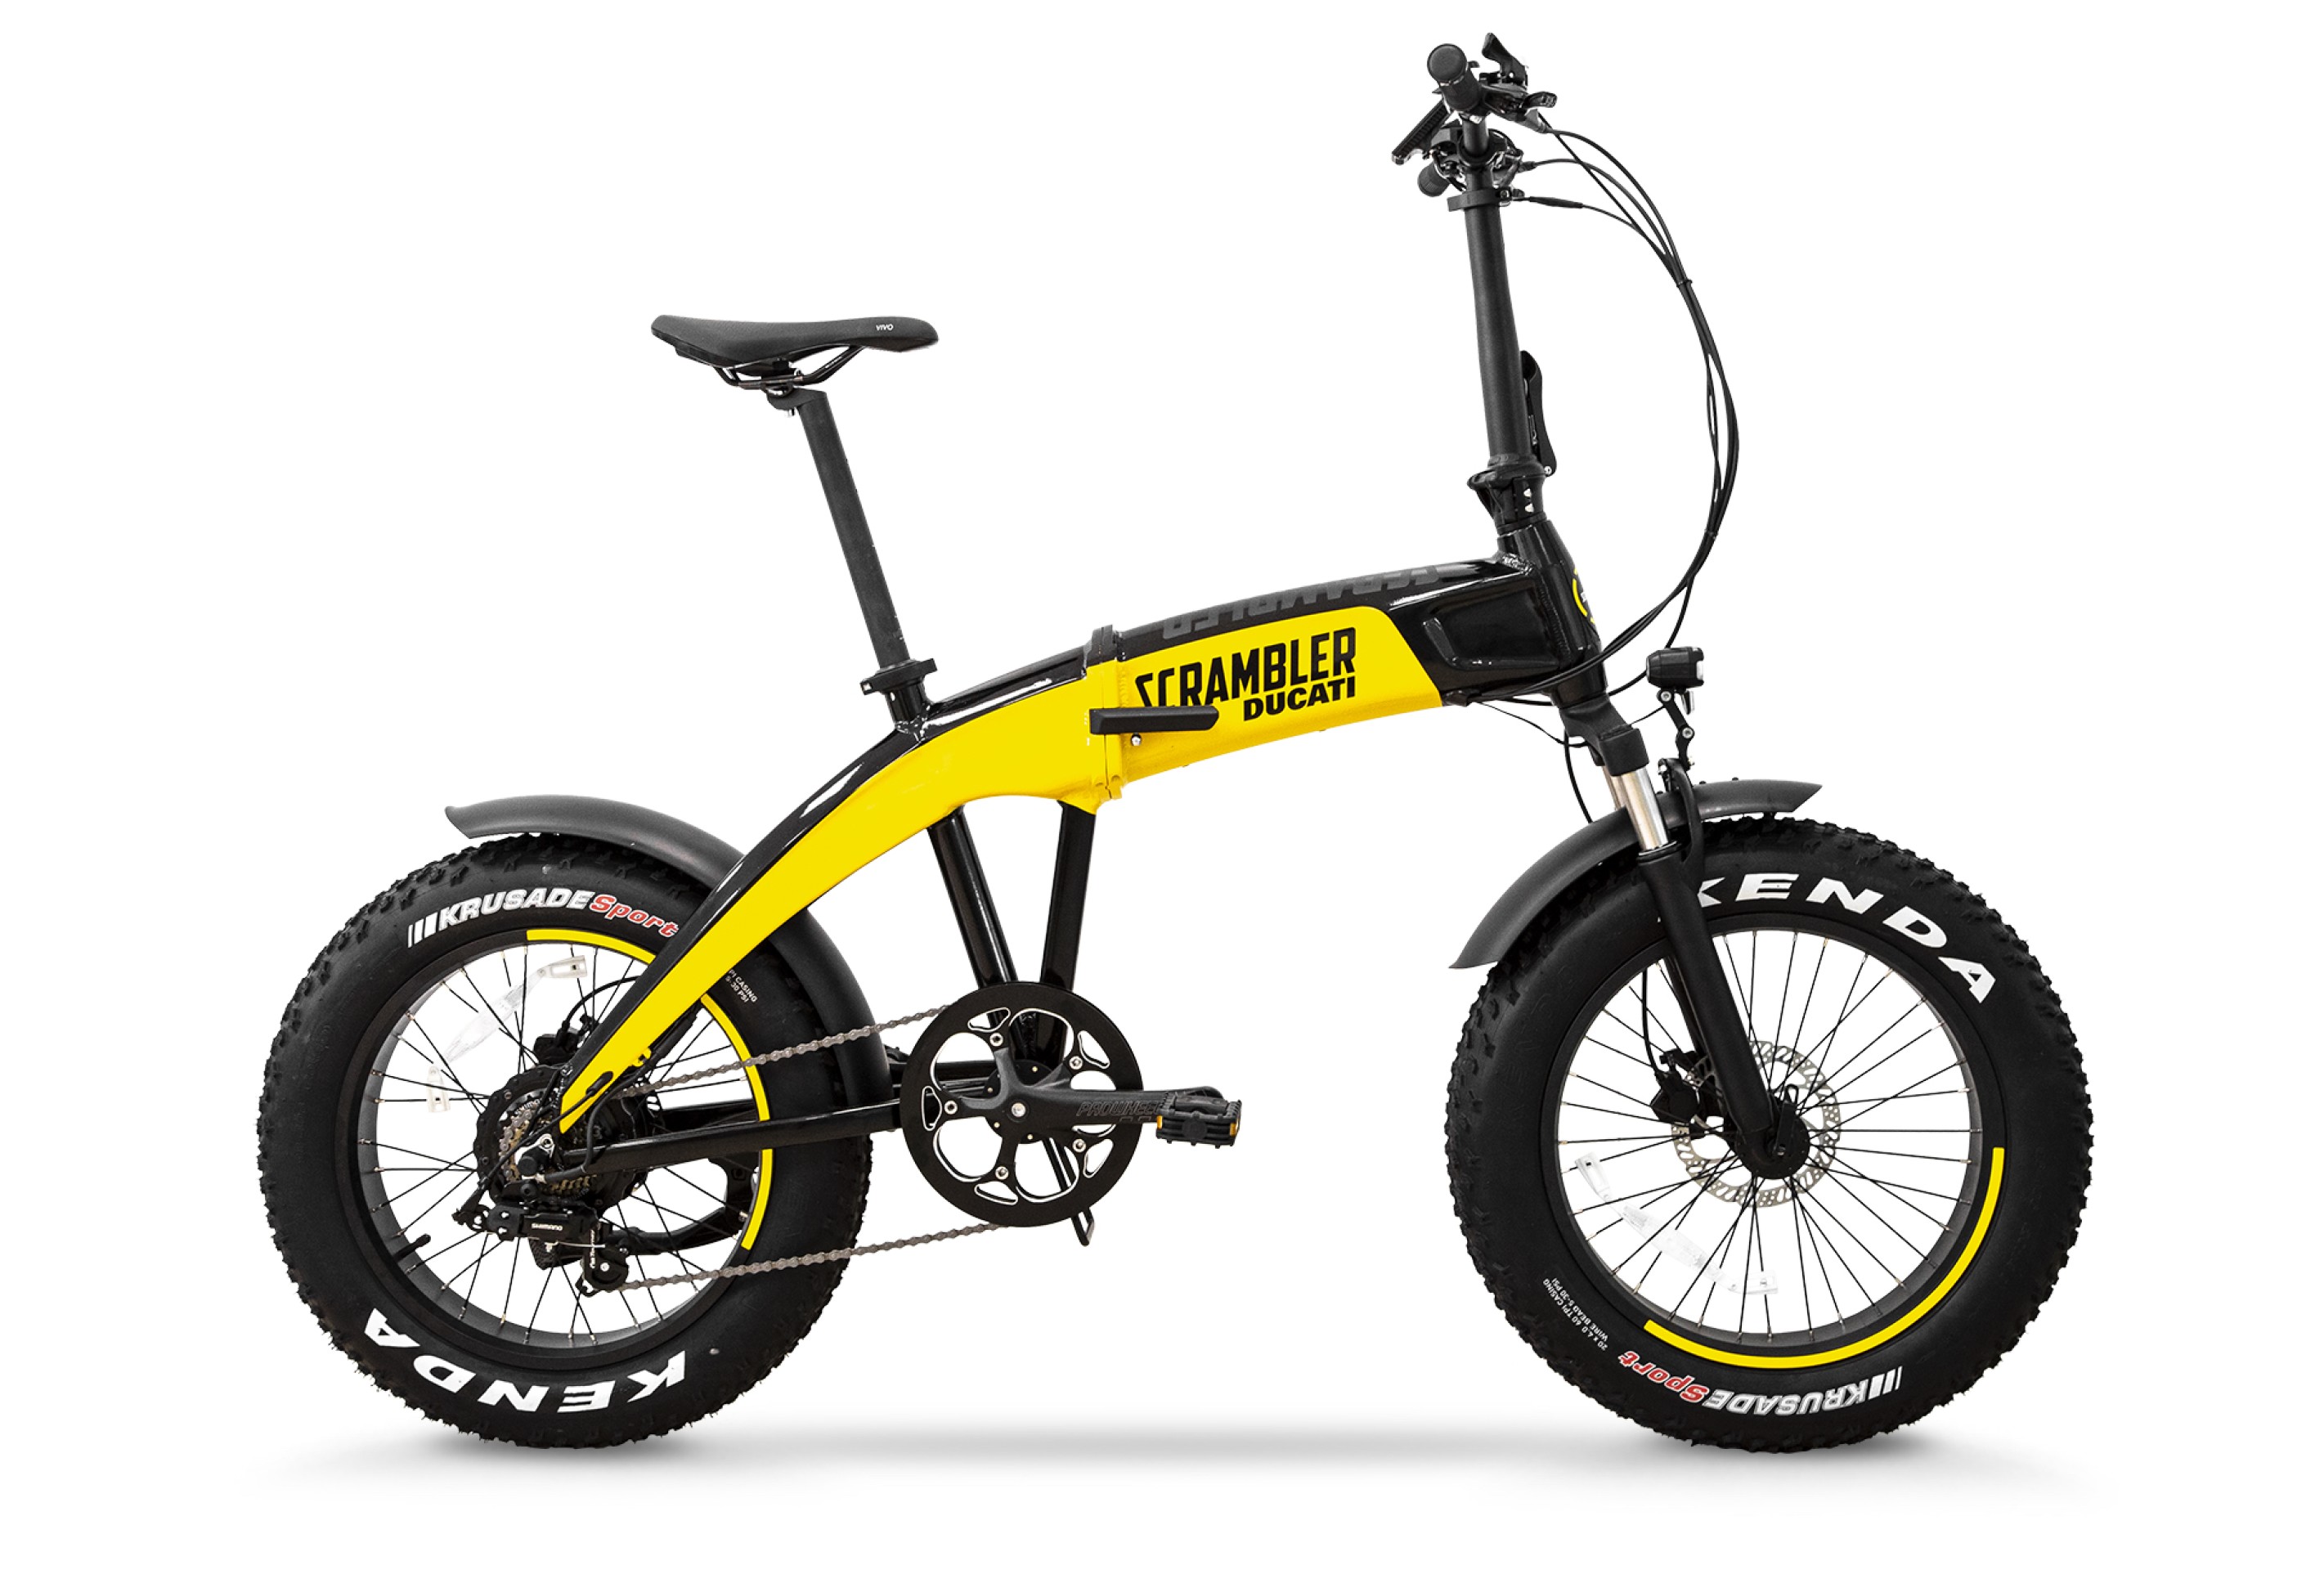 folding electric bike with suspension